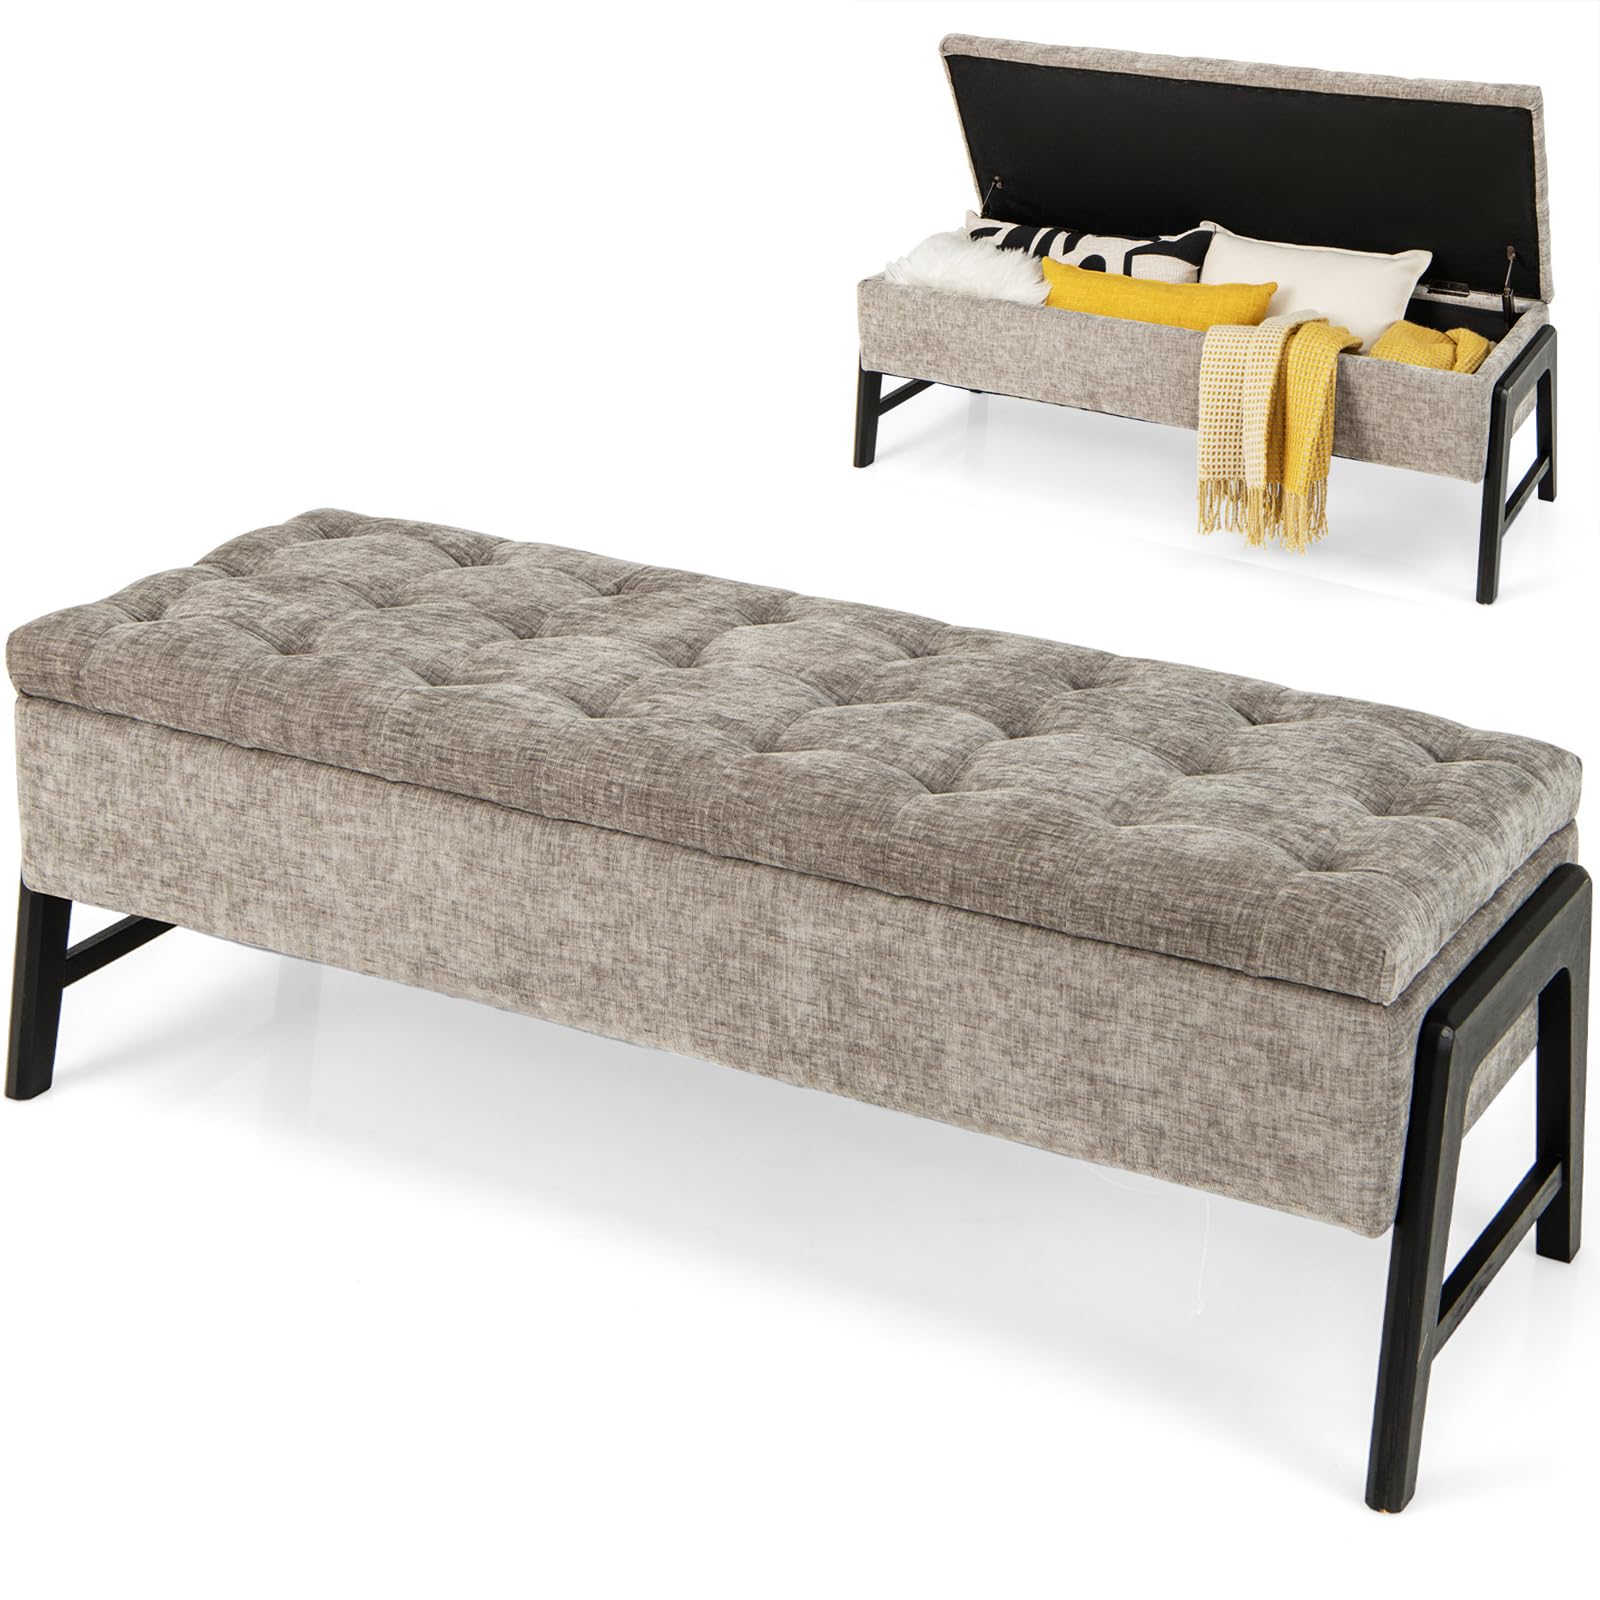 Giantex 50" Storage Bench - End of Bed Bench, Entryway Bench with Storage